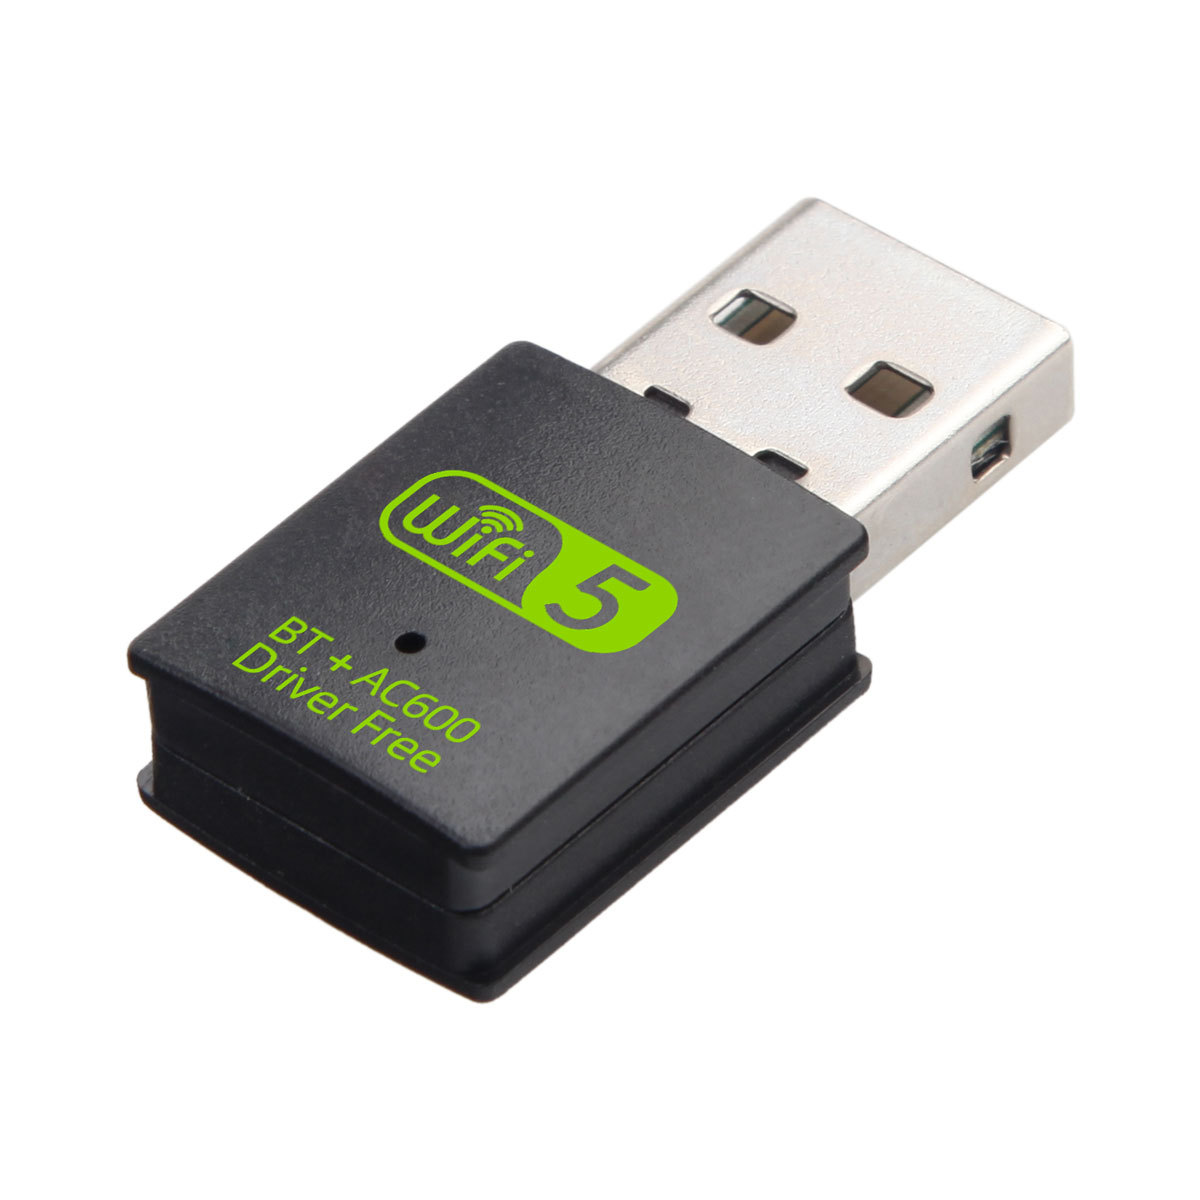 600M-Dual-Band-Driver-Free-USB20-Wireless-Networking-Adapter-WiFi-2-in-1-Wireless-Network-Card-for-D-1642007-4